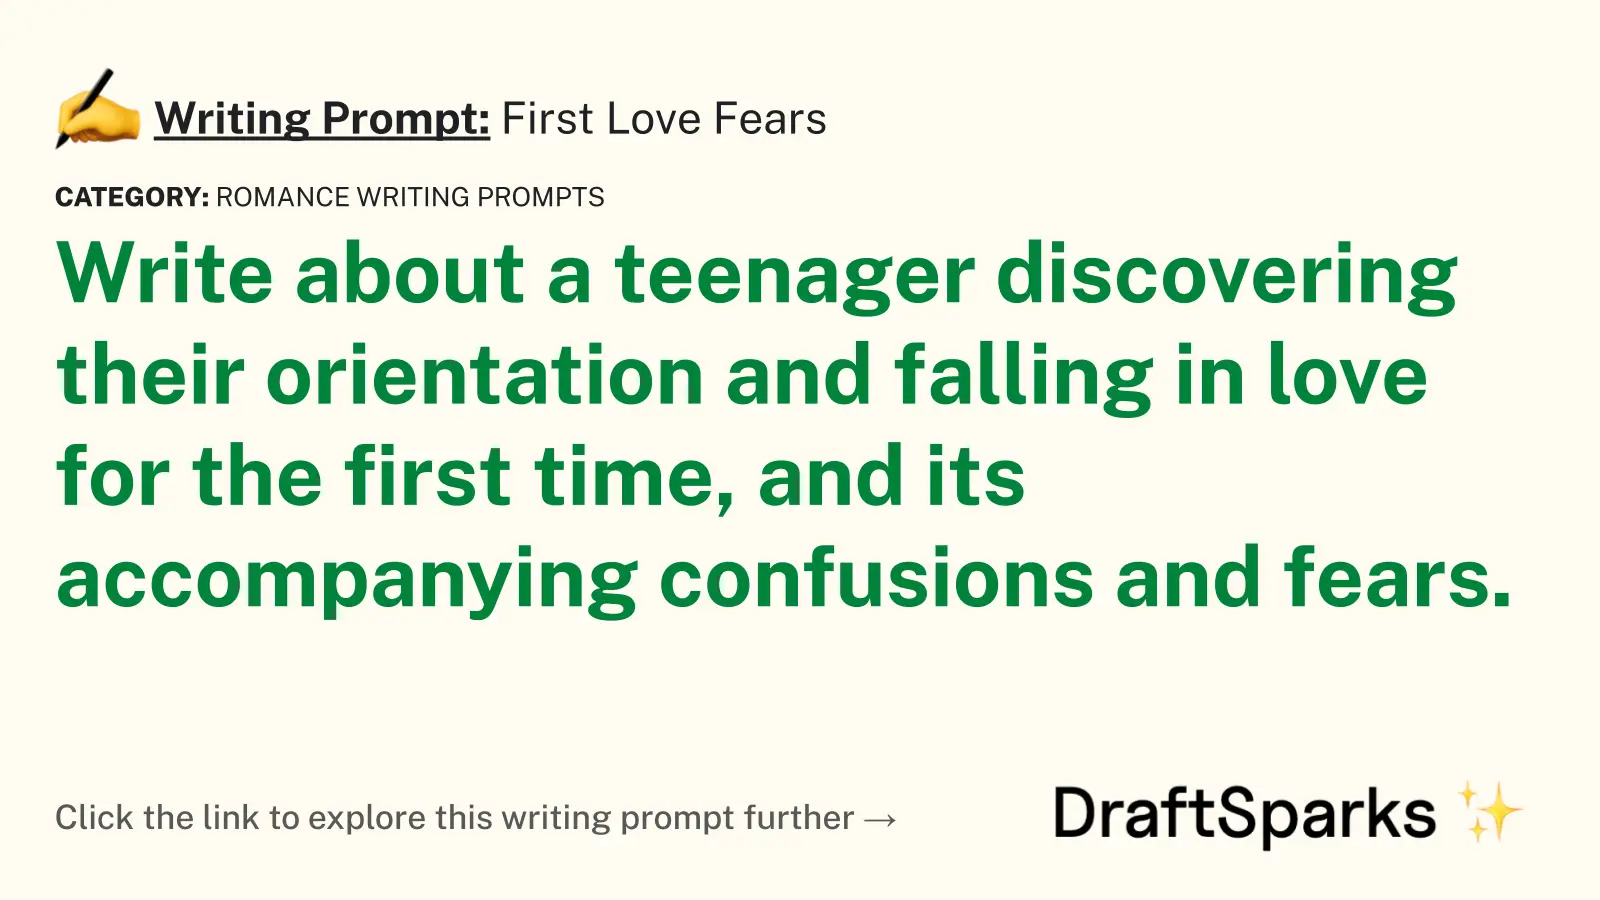 First Love Fears